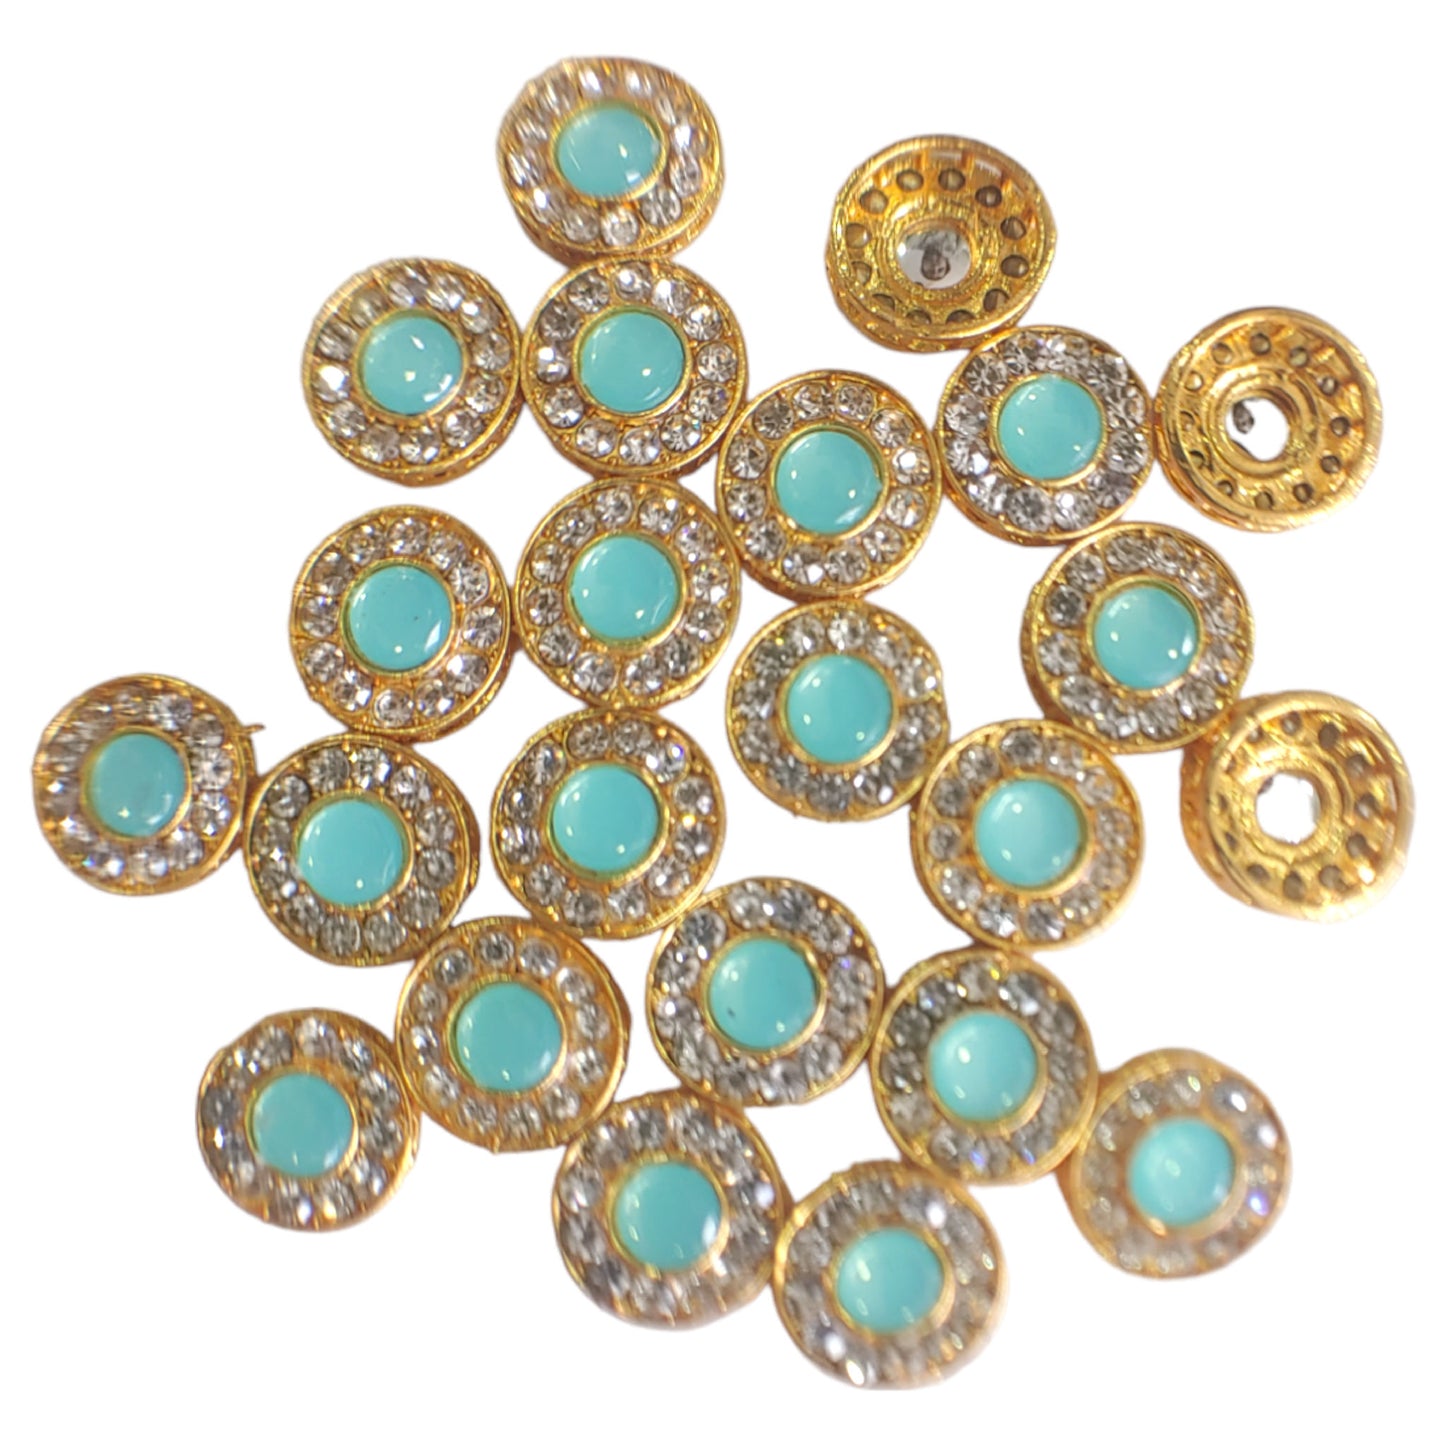 14mm Casting Metal Round Stone Studded Pendant Motif For Craft Or Decor - 50 Pcs